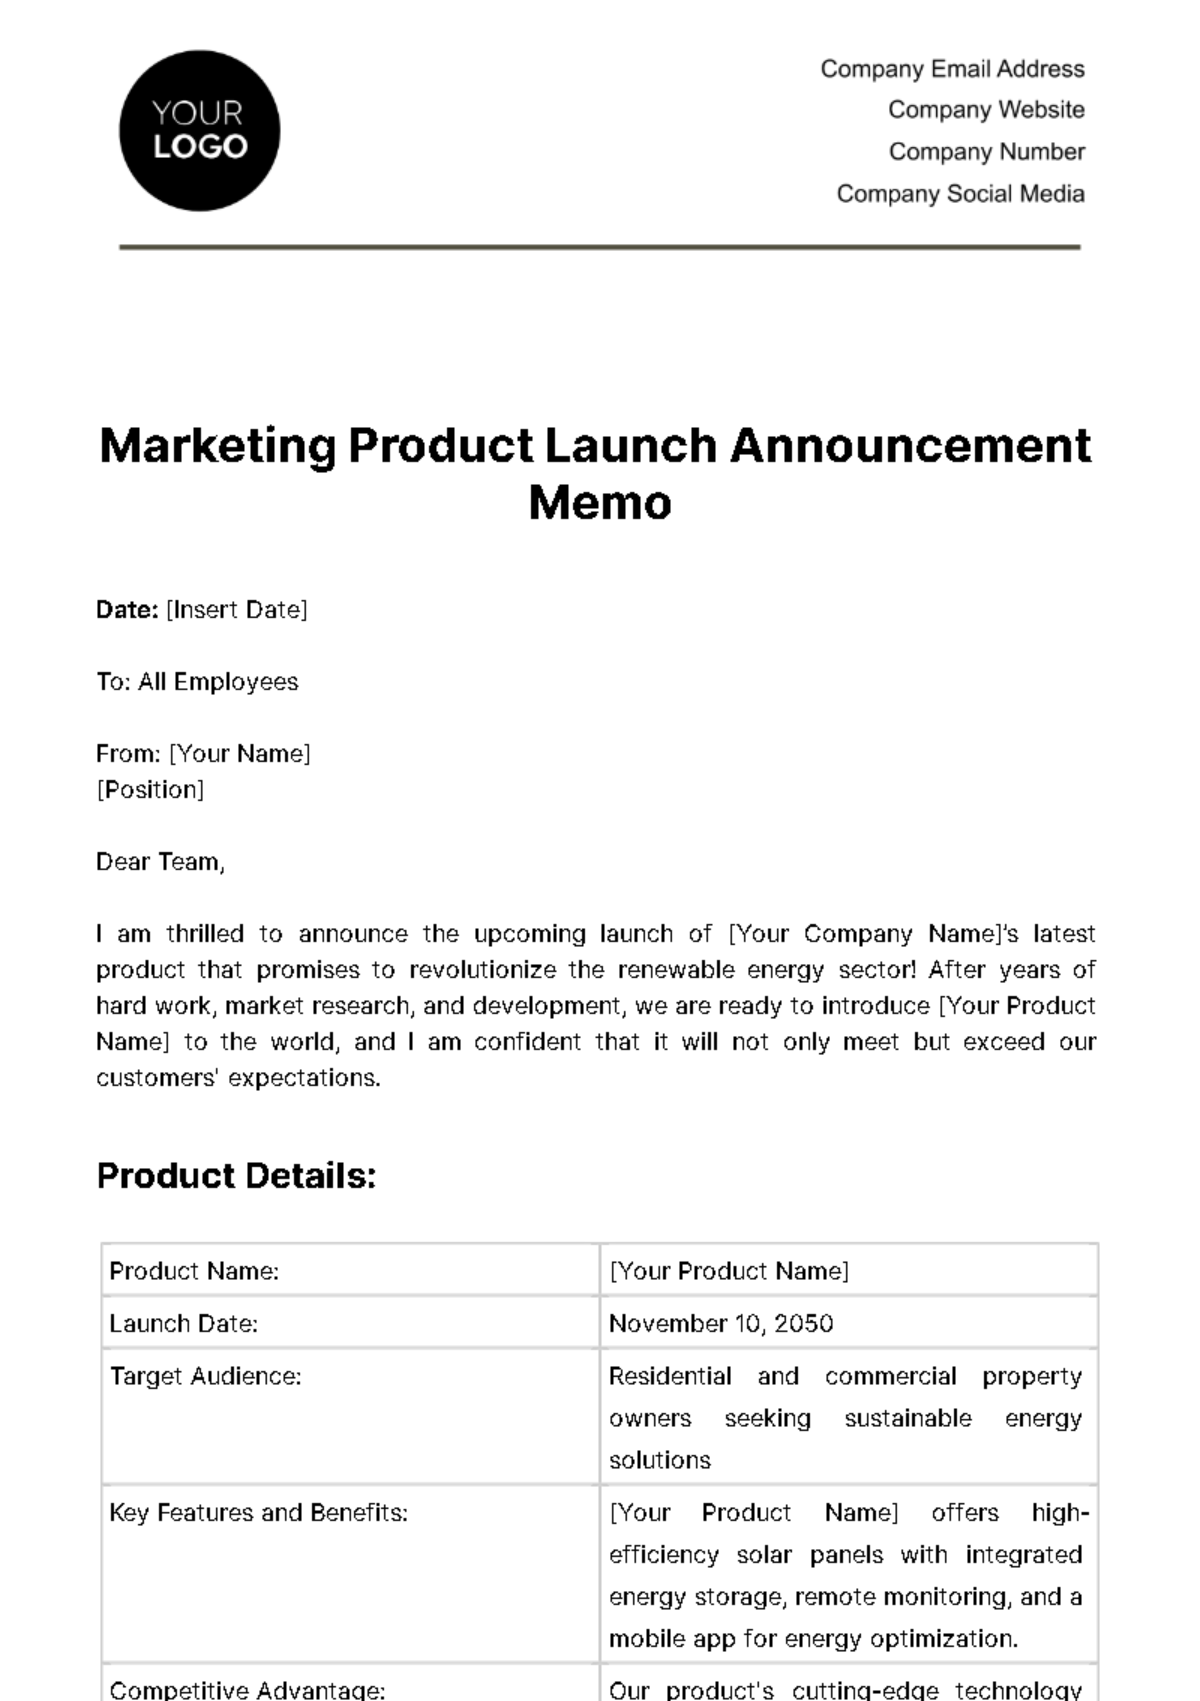 Marketing Product Launch Announcement Memo Template